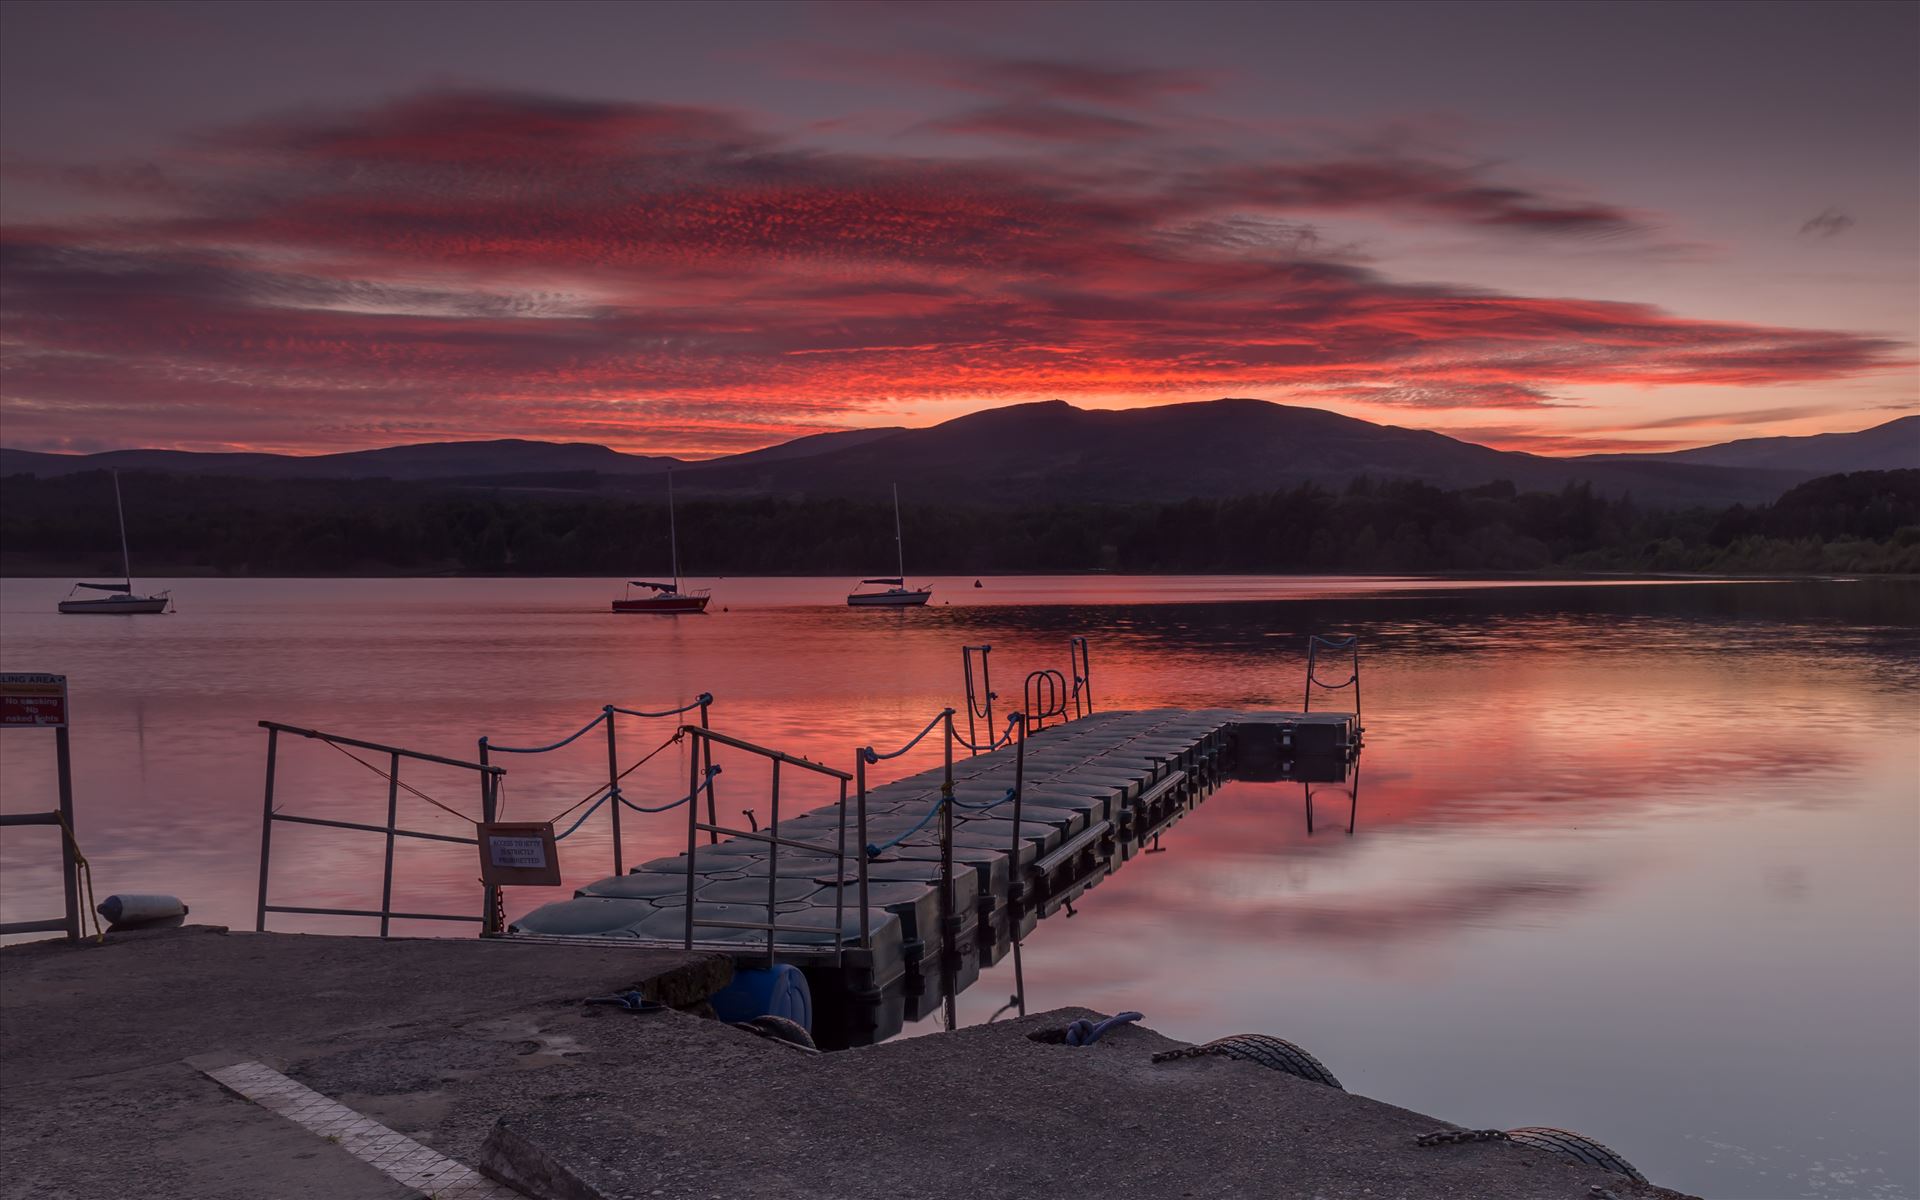 Sunset at Loch Insh, nr Aviemore -  by philreay